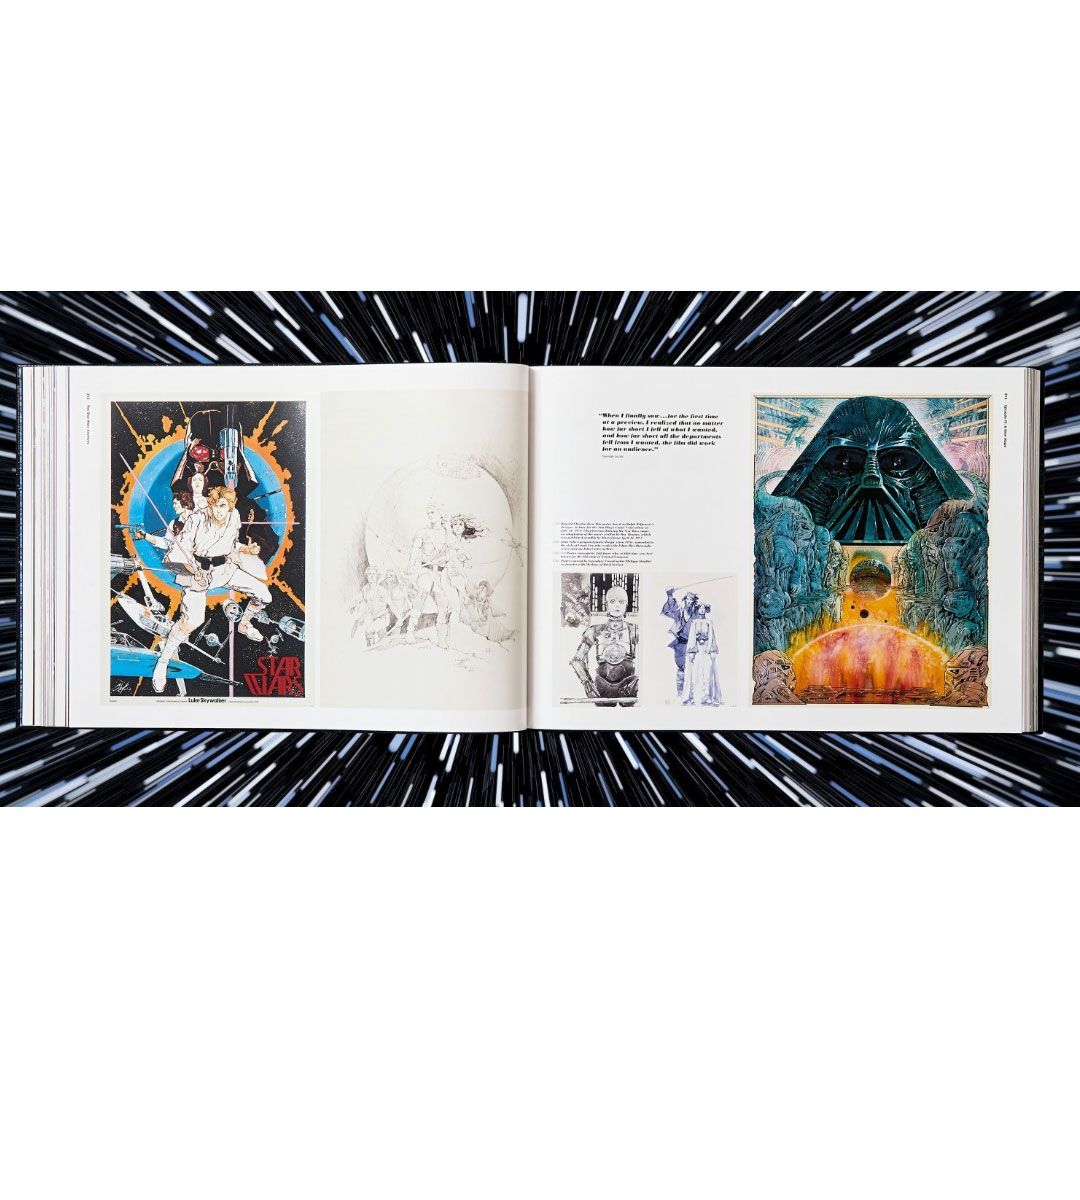 Les Archives Star Wars 1977-1983